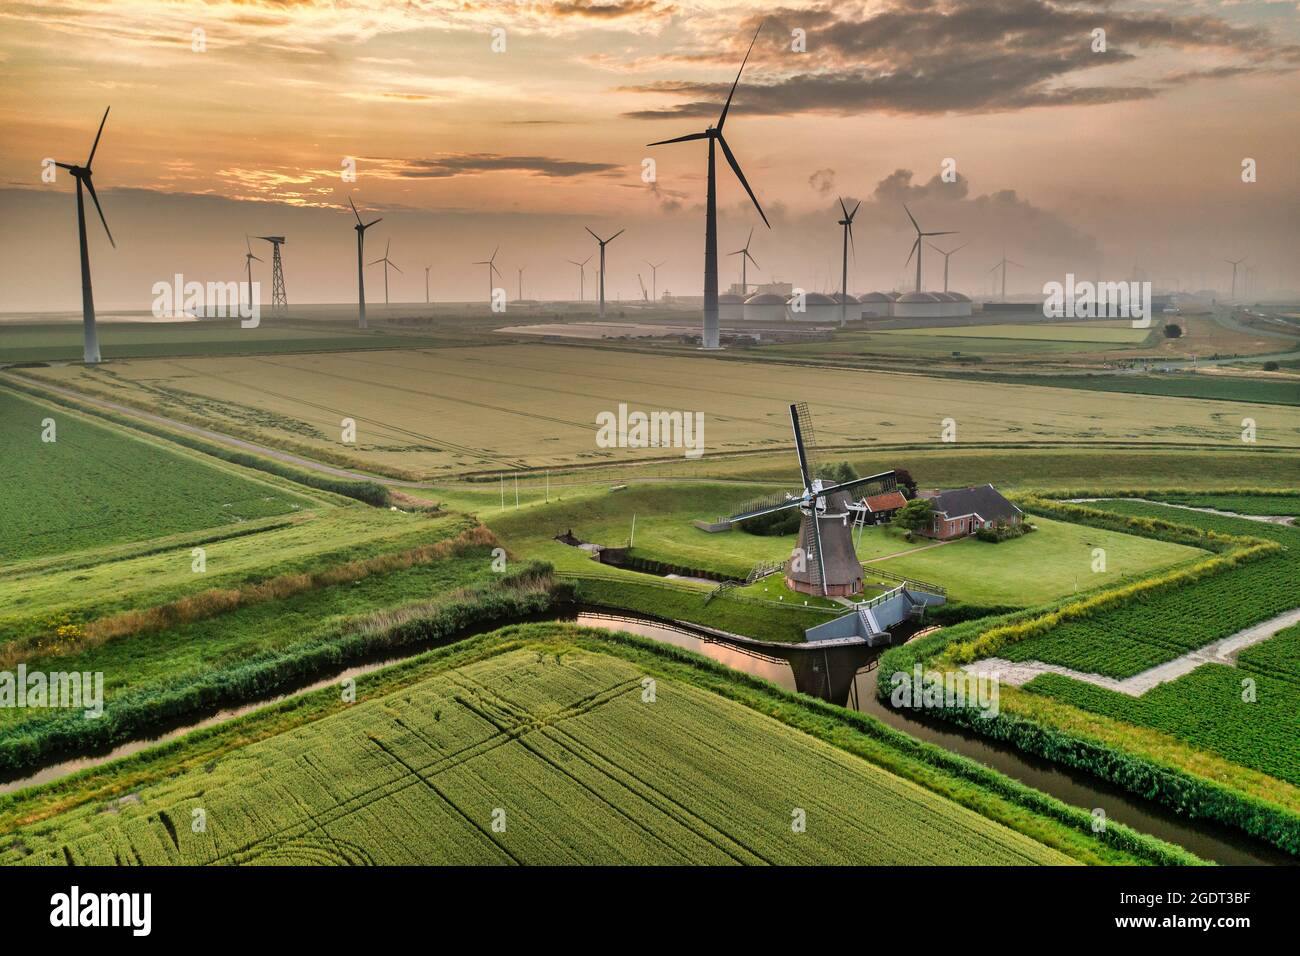 The Netherlands. Eemshaven. Wind park Eemsmond. Wind turbines. Foreground: ancient windmill (1897) called Goliath. Sunrise. Aerial. Stock Photo